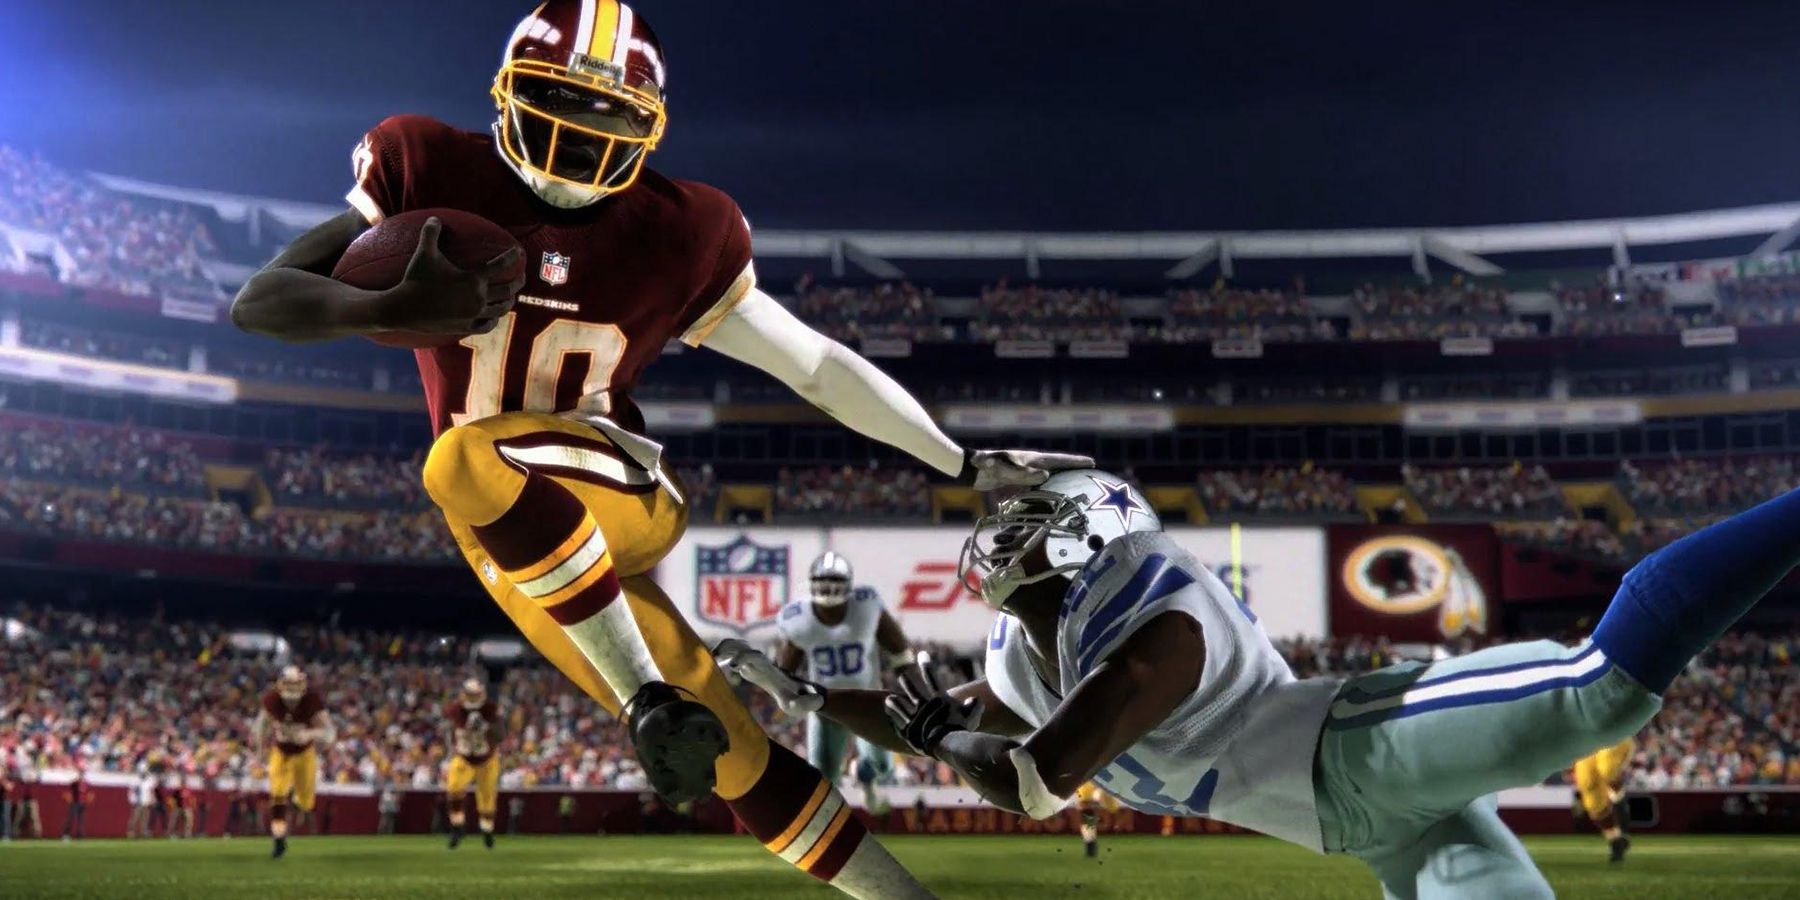 Madden NFL 15, gameplay announcement screenshot showing a player avoiding a failed tackle.